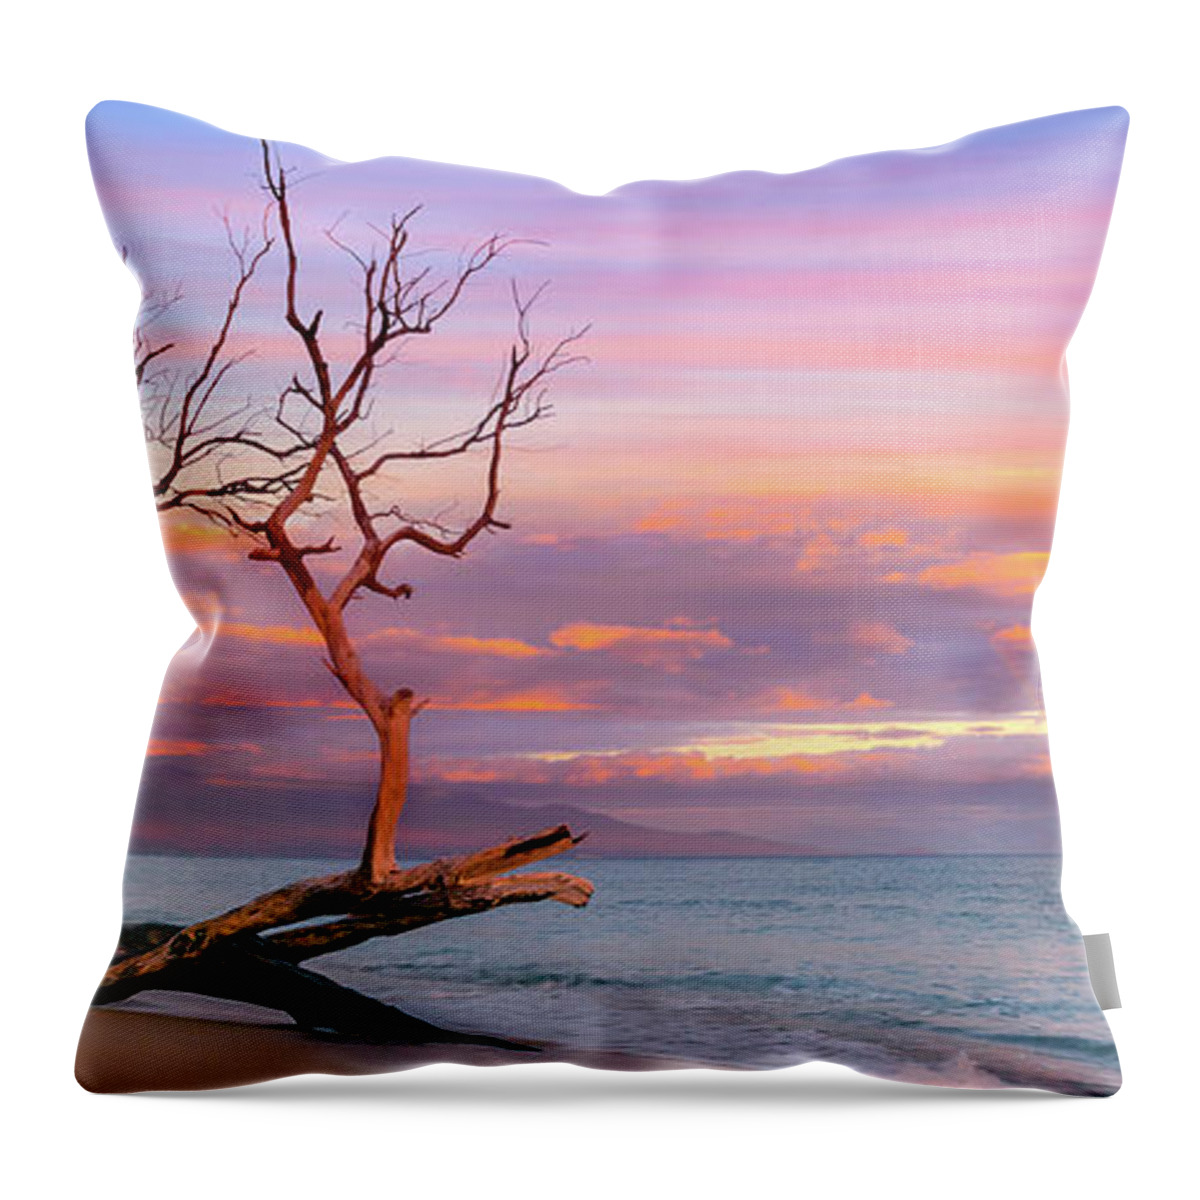 Sunset Maui Hawaii Ukemehame Dead Tree Rainbow Seascape Throw Pillow featuring the photograph Follow The Rainbow by James Roemmling